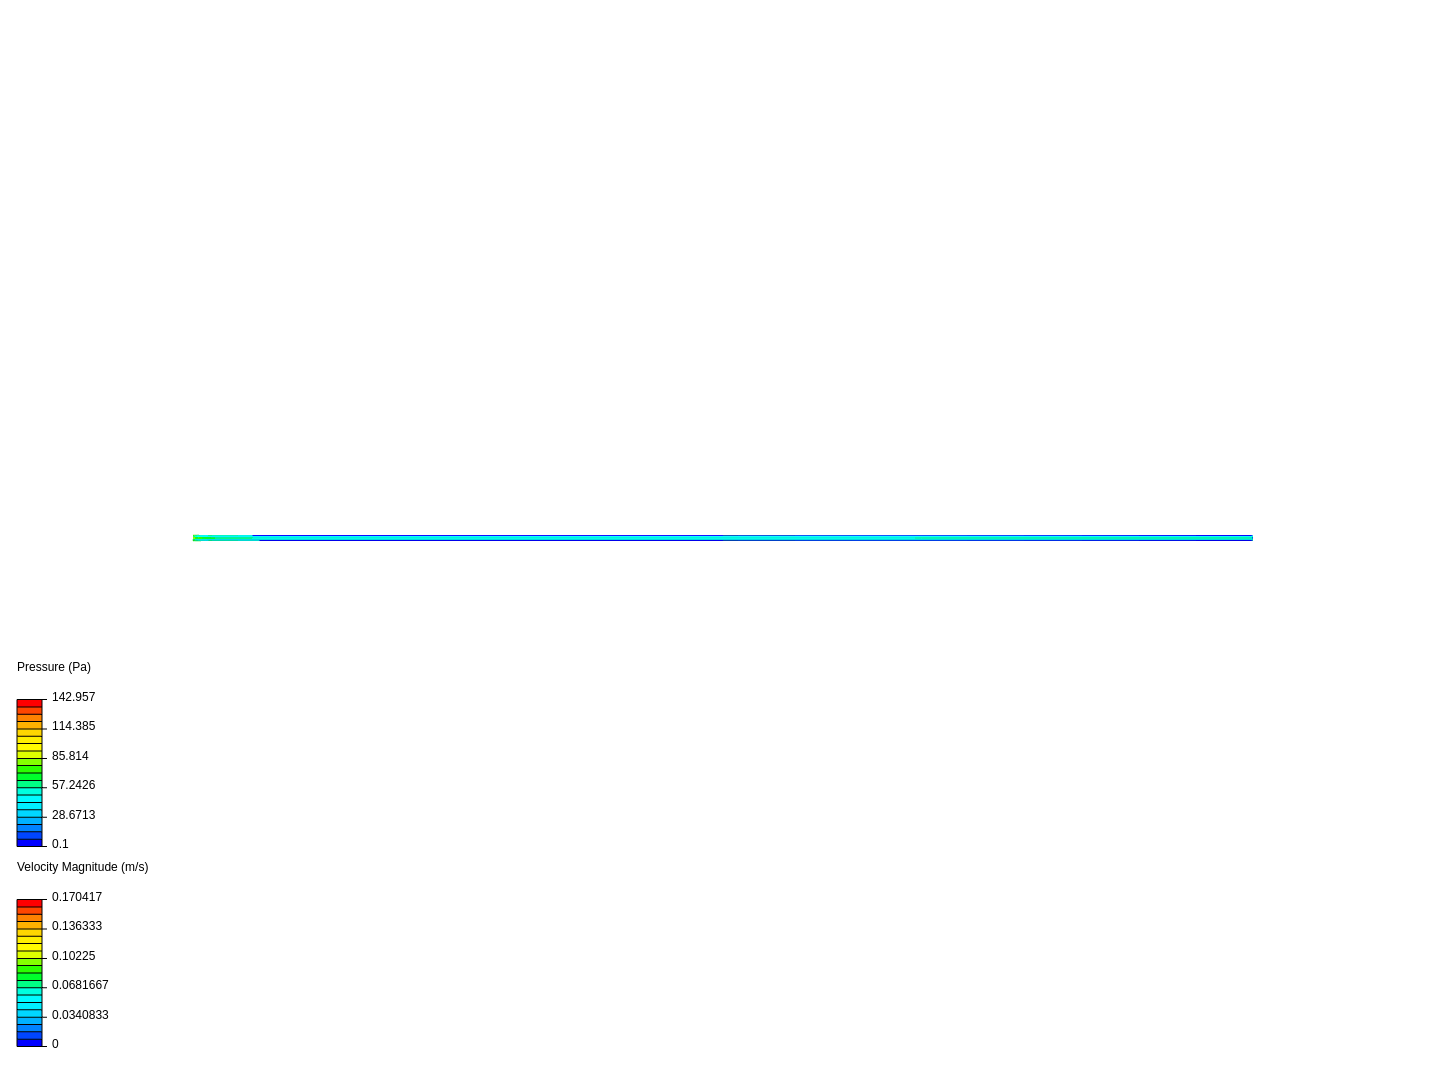 Laminar Flow through Straight Pipe - Poiseuille's Law image